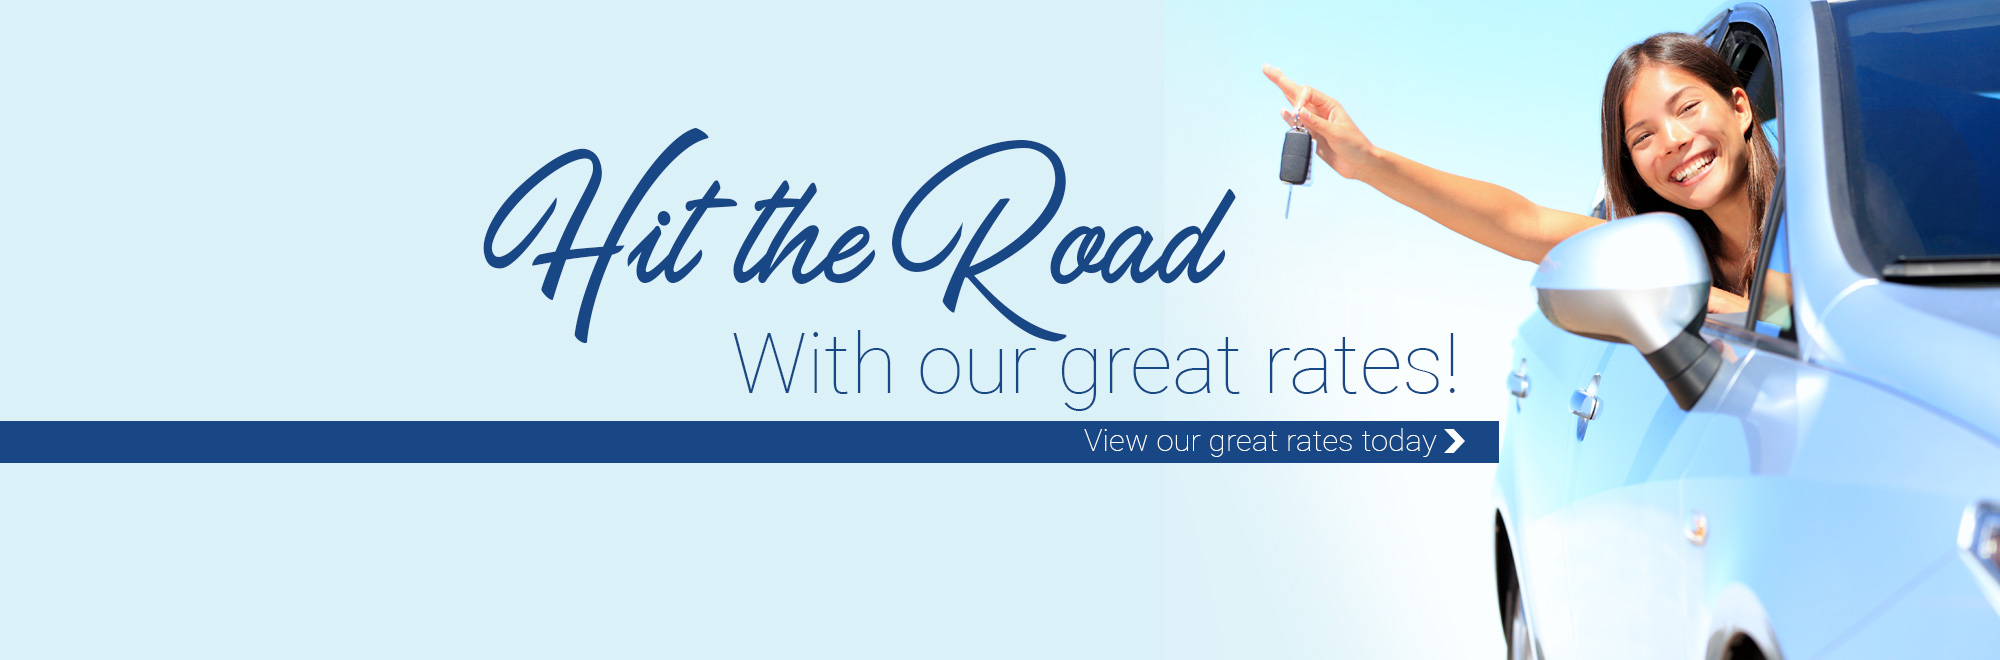 Hit the Road with our great rates!